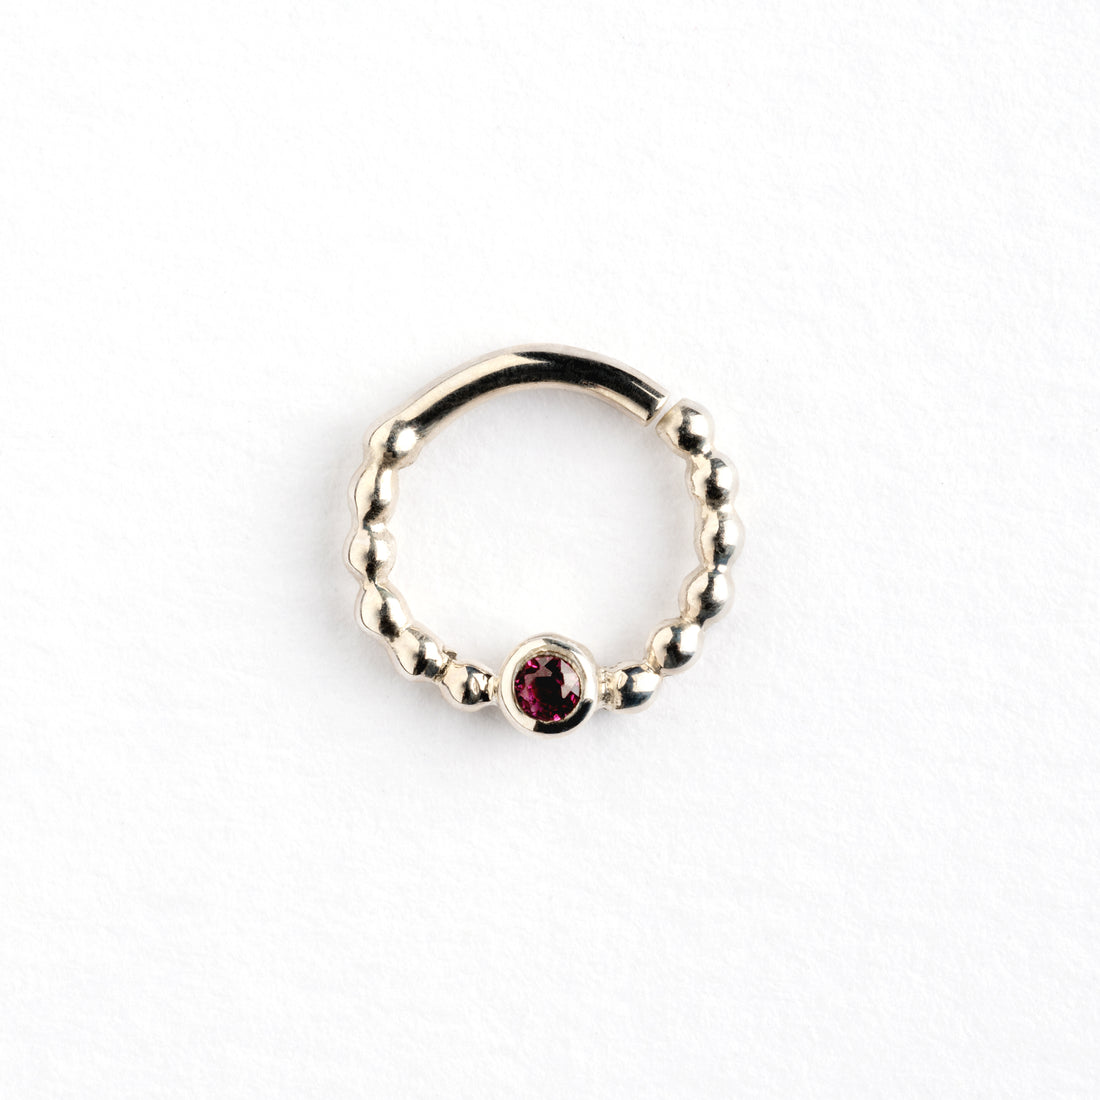 sterling silver dotted septum ring with Garnet gemstone frontal view